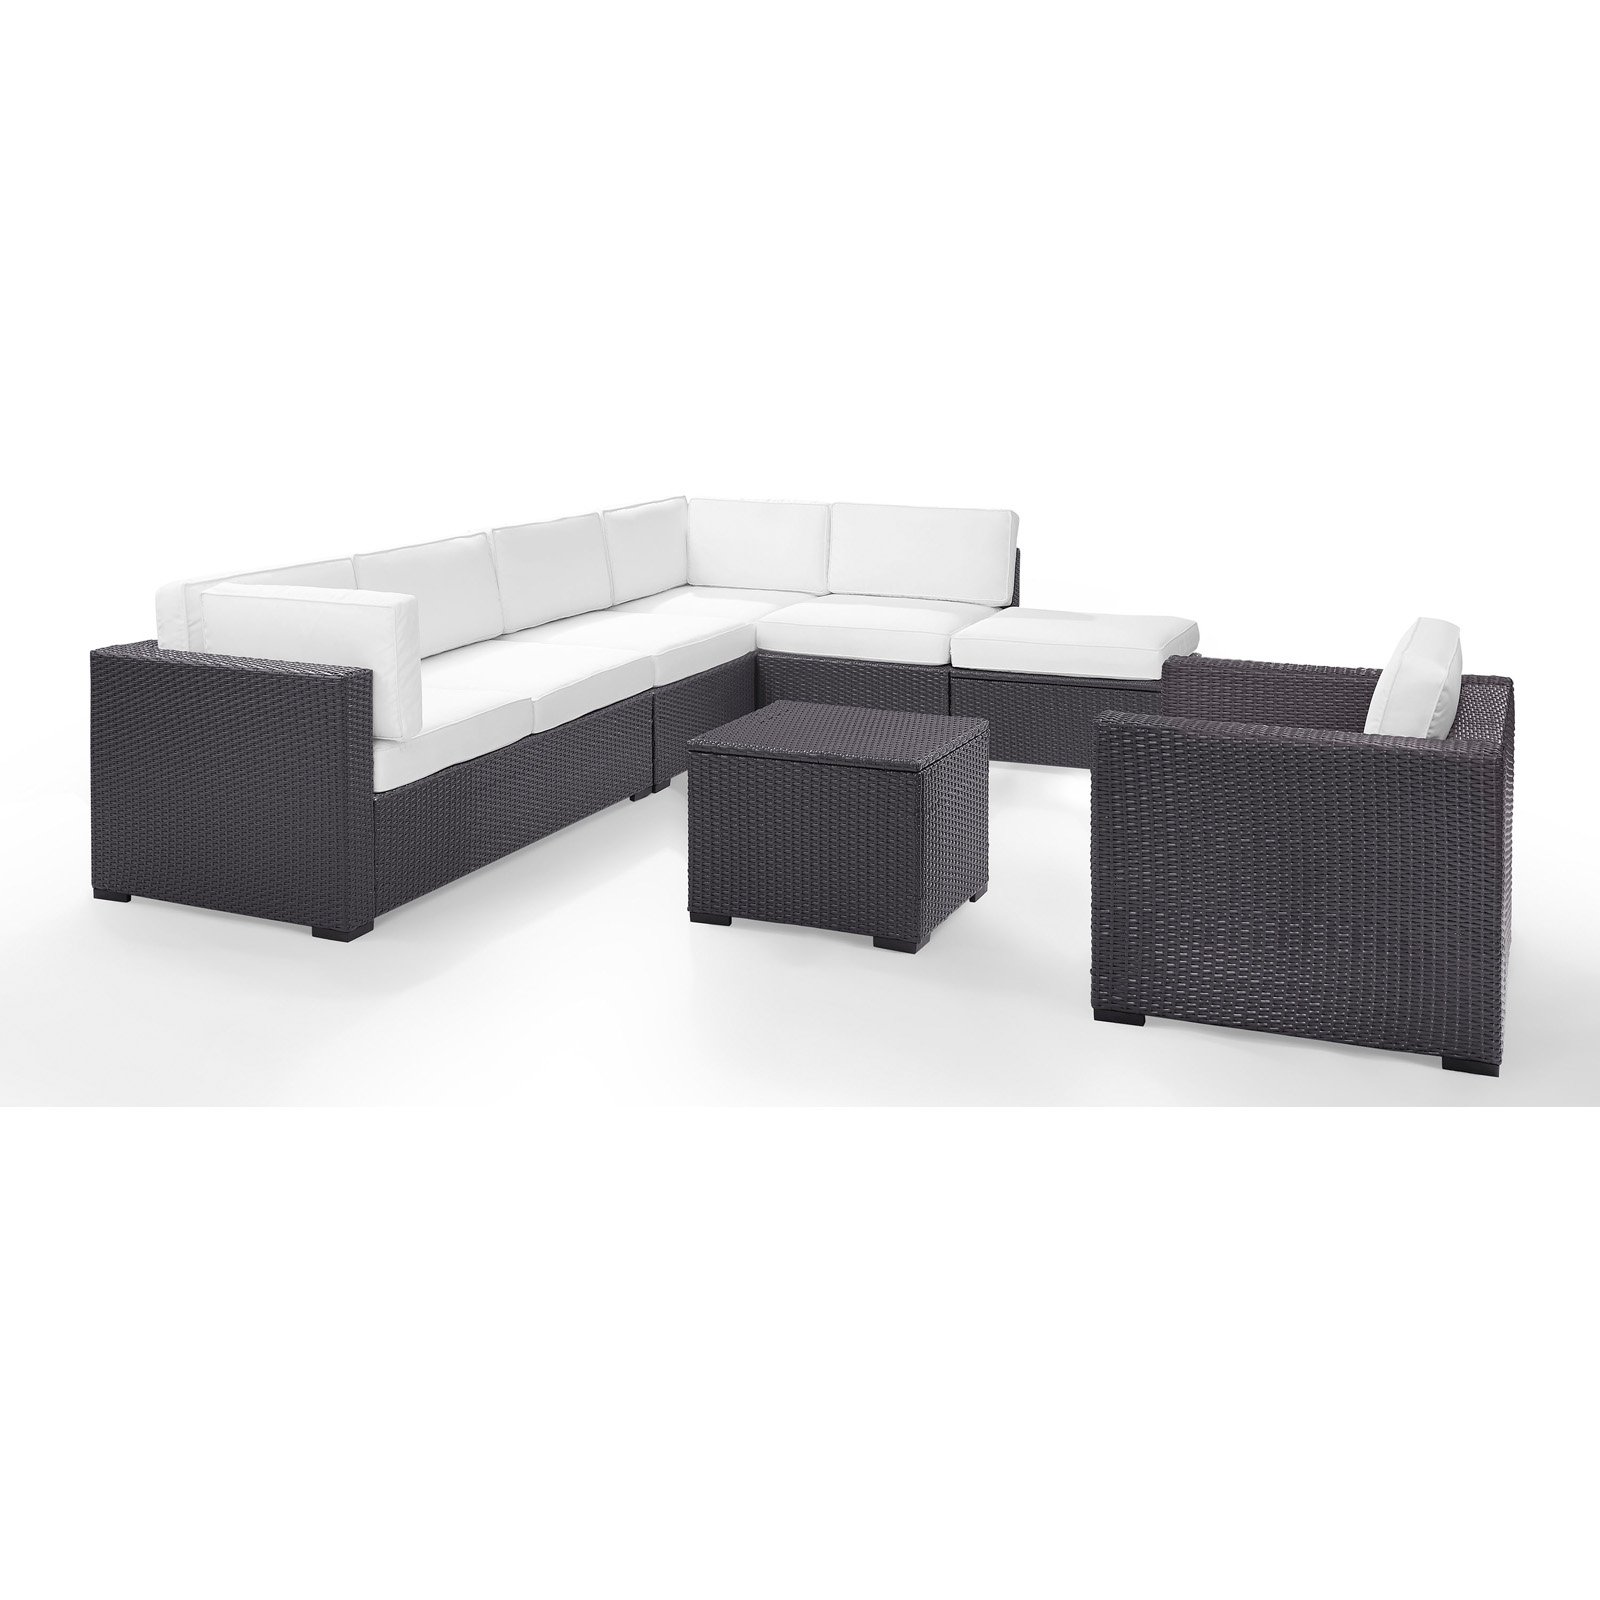 Crosley KO70107BR-WH Biscayne 6 Piece Outdoor Wicker Seating Set - White - image 1 of 11